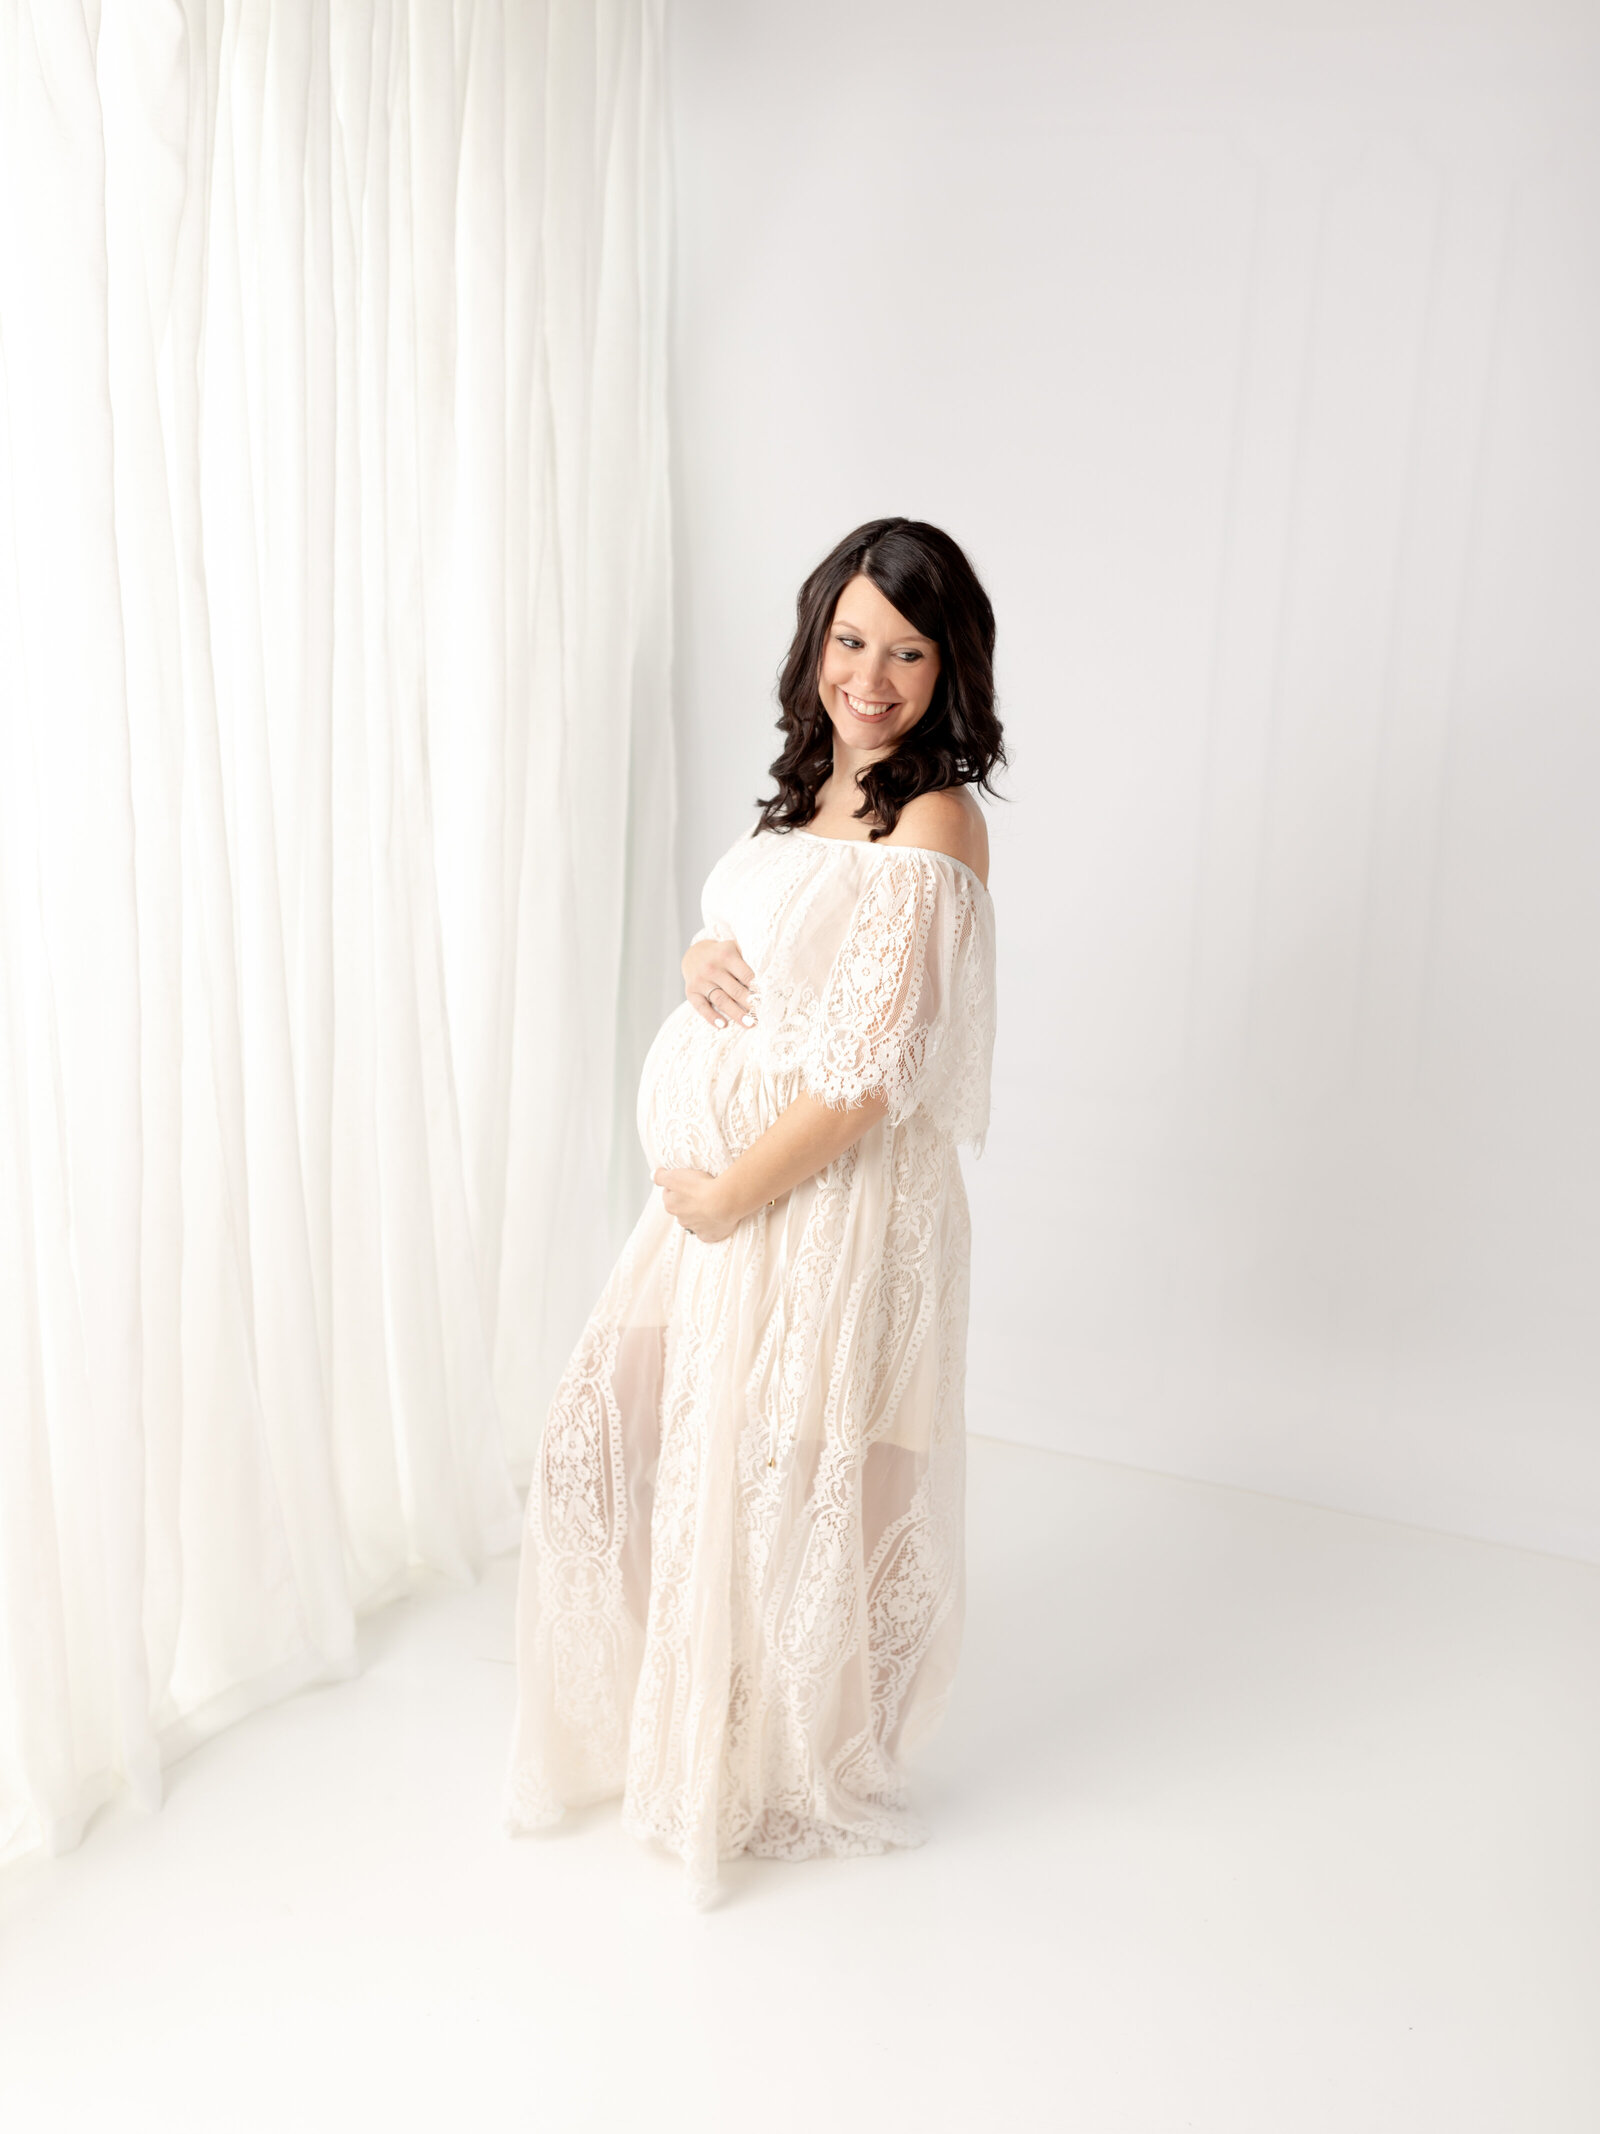 pregnant mother in white lace dress posing for photoshoot cleveland maternity photographer